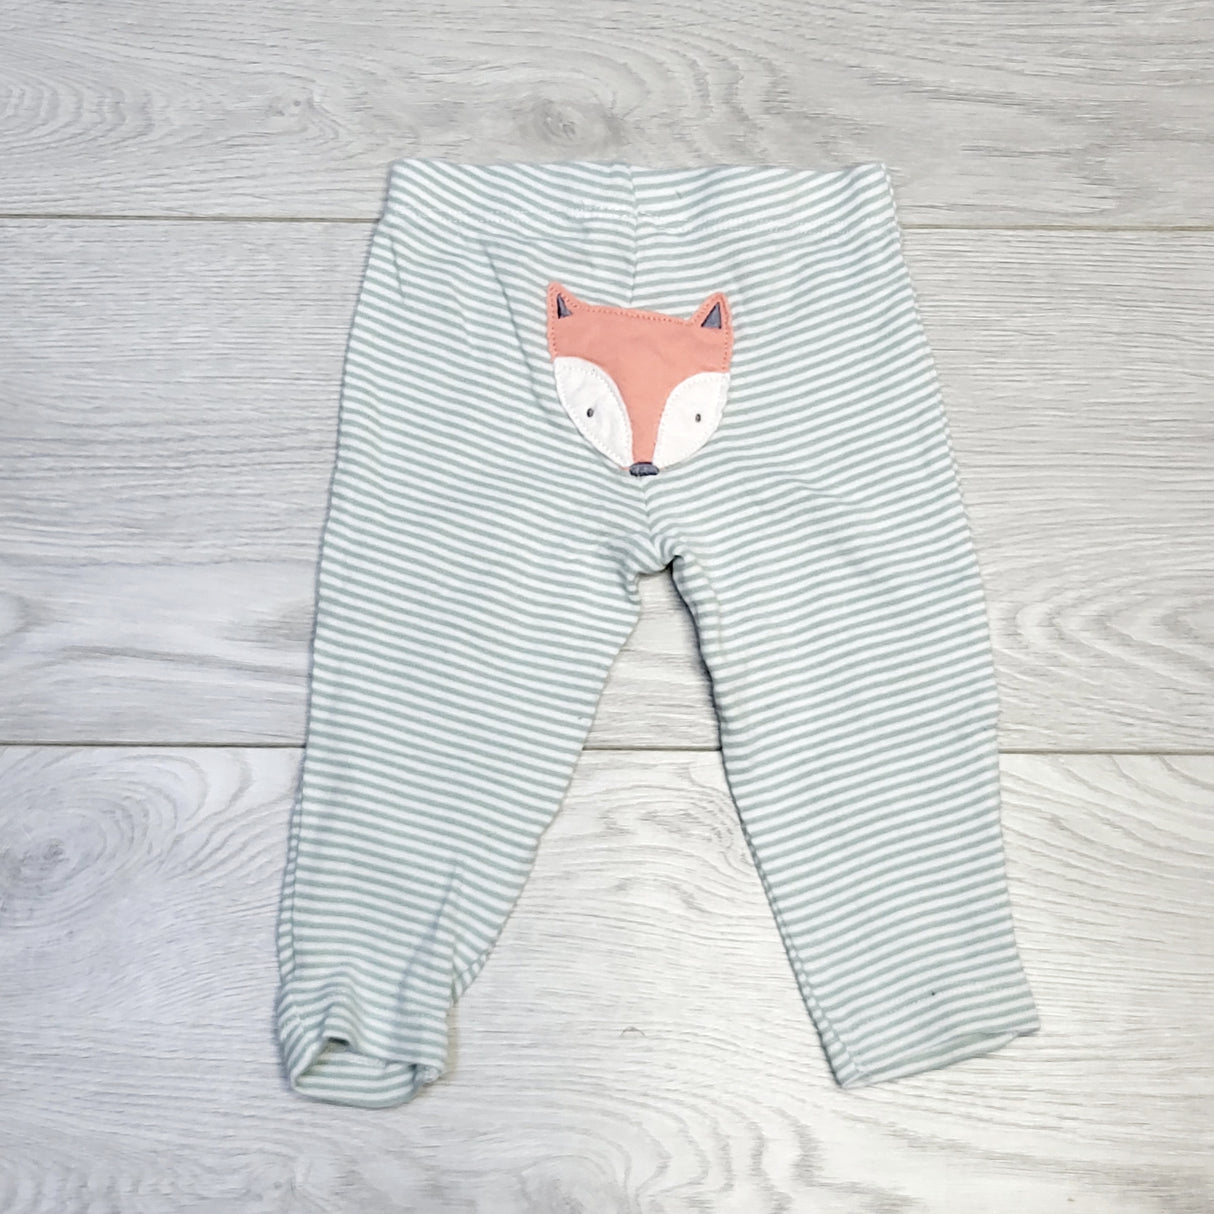 COWN1 - Just One You striped cotton leggings with fox bum. Size 6 months